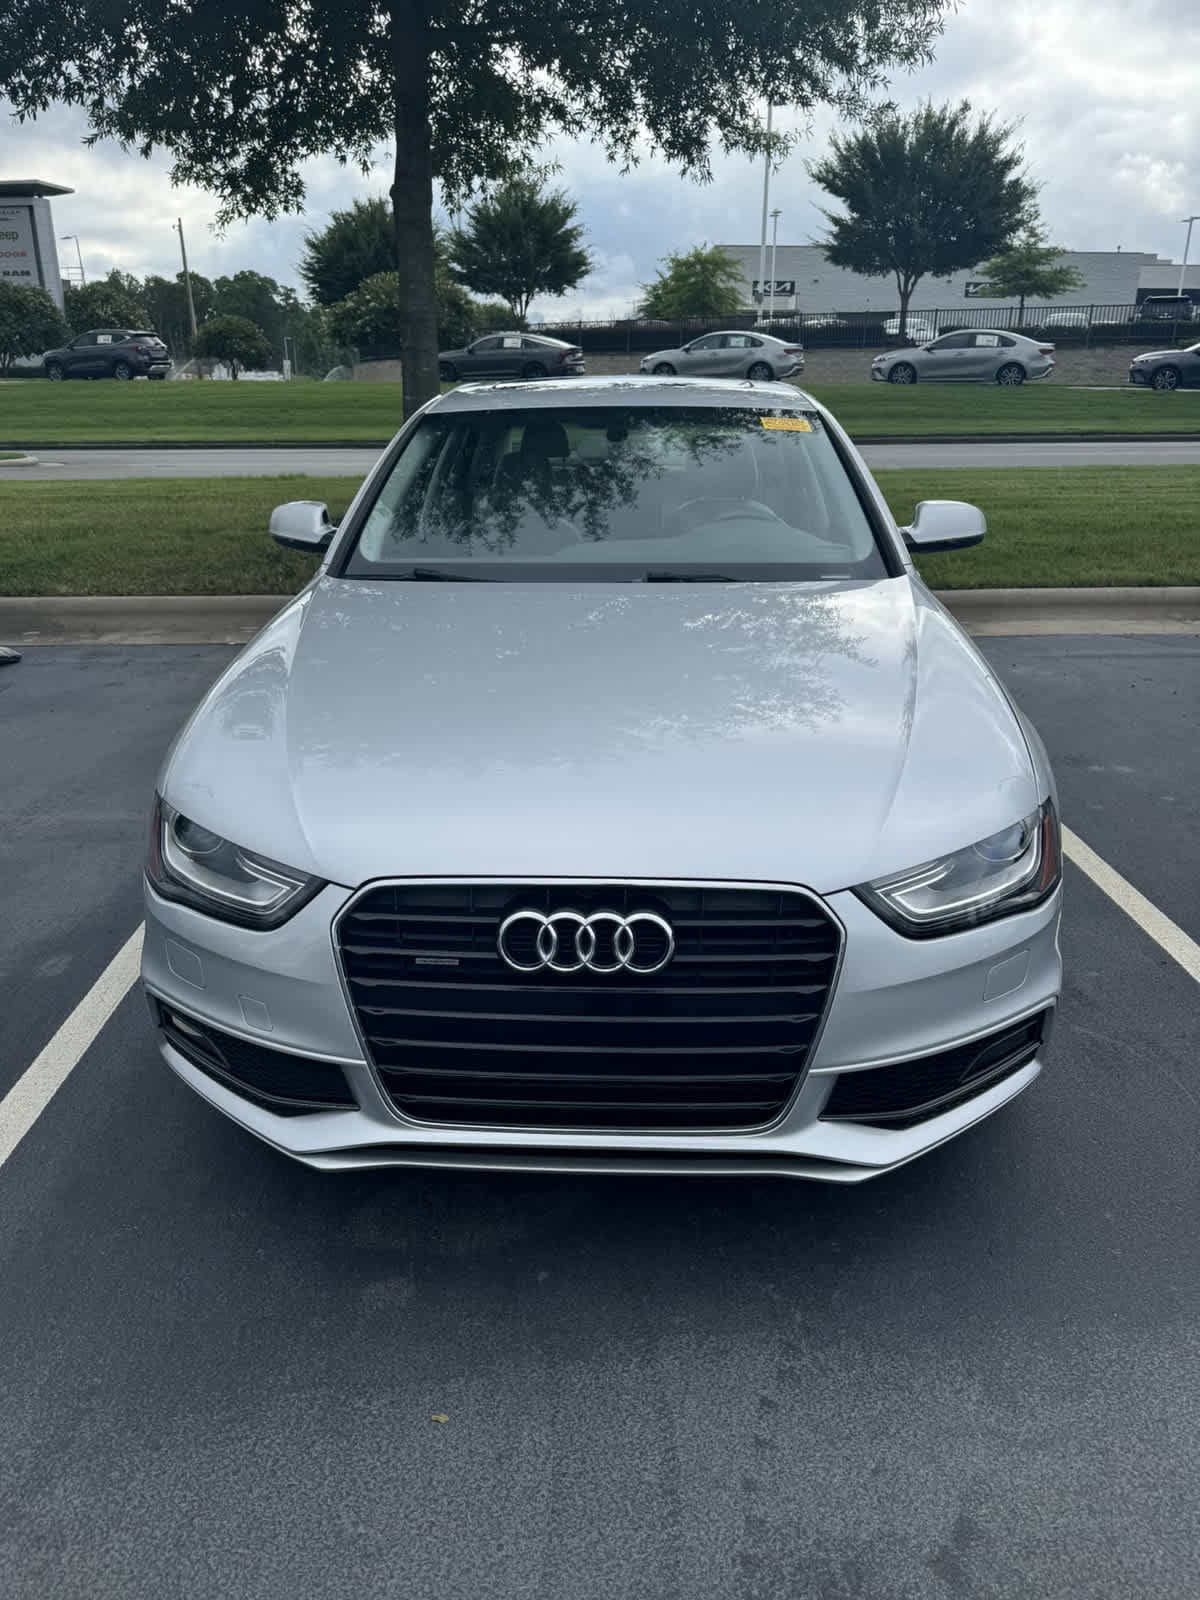 Used 2014 Audi A4 Premium with VIN WAUFFAFL1EN030759 for sale in Concord, NC